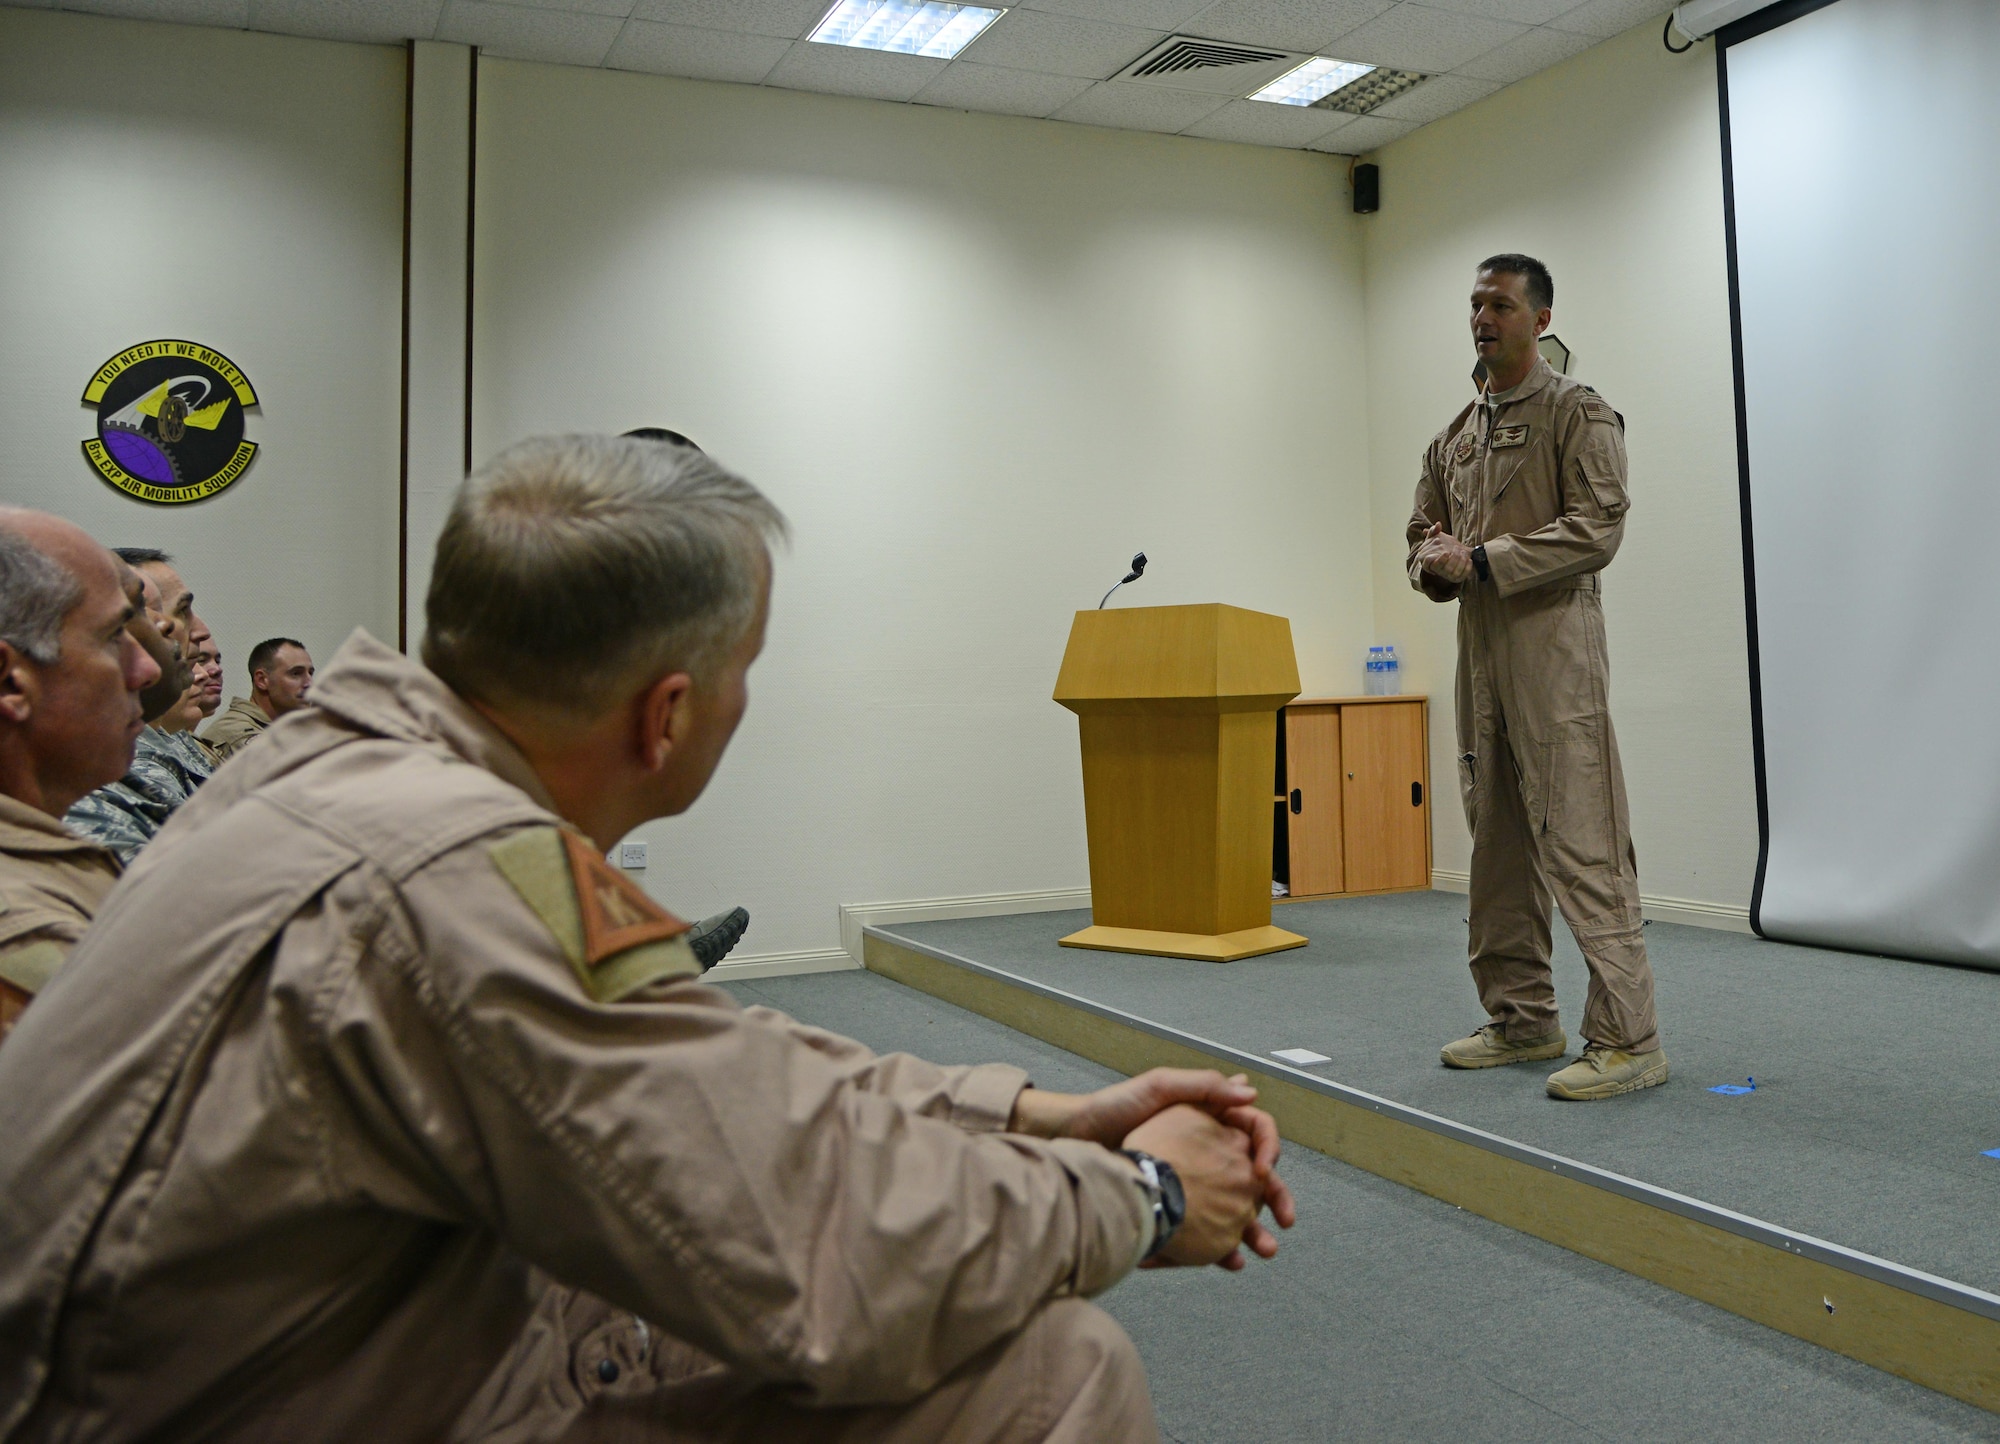 U.S. Air Force Lt. Col. Byron Newell, 746th Expeditionary Airlift Squadron commander, gives remarks after assuming command of his new squadron during a change of command ceremony, March 1, 2015, at Al Udeid Air Base, Qatar. Newell assumed command of the 746th from Lt. Col. Jeremy Schaad who is returning to his home unit, the 153rd Airlift Wing in Cheyenne, Wyo. (U.S. Air Force photo by Senior Airman Kia Atkins)